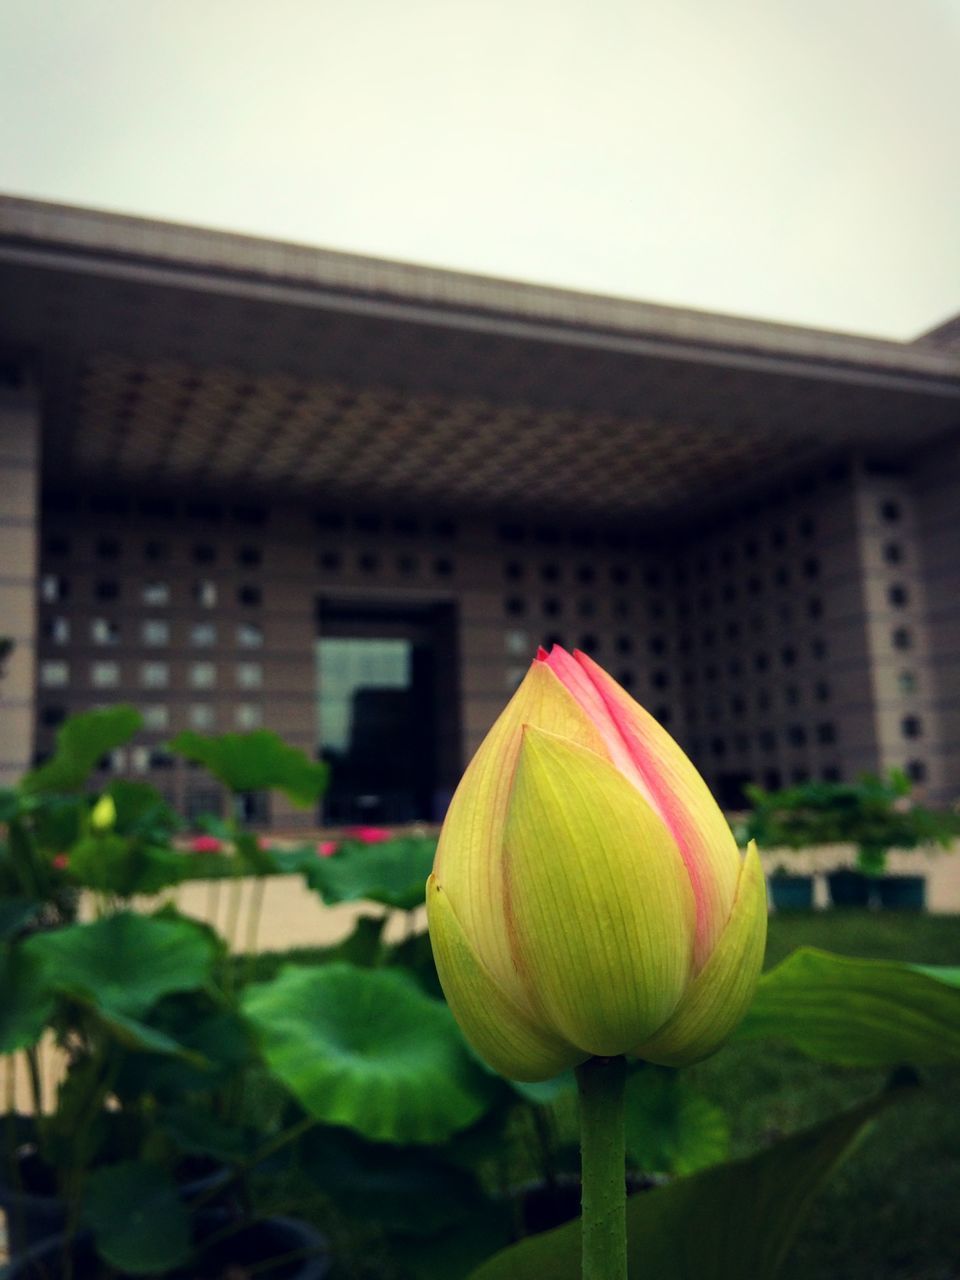 flower, freshness, growth, plant, fragility, petal, focus on foreground, flower head, built structure, building exterior, close-up, leaf, architecture, green color, tulip, nature, yellow, beauty in nature, stem, blooming